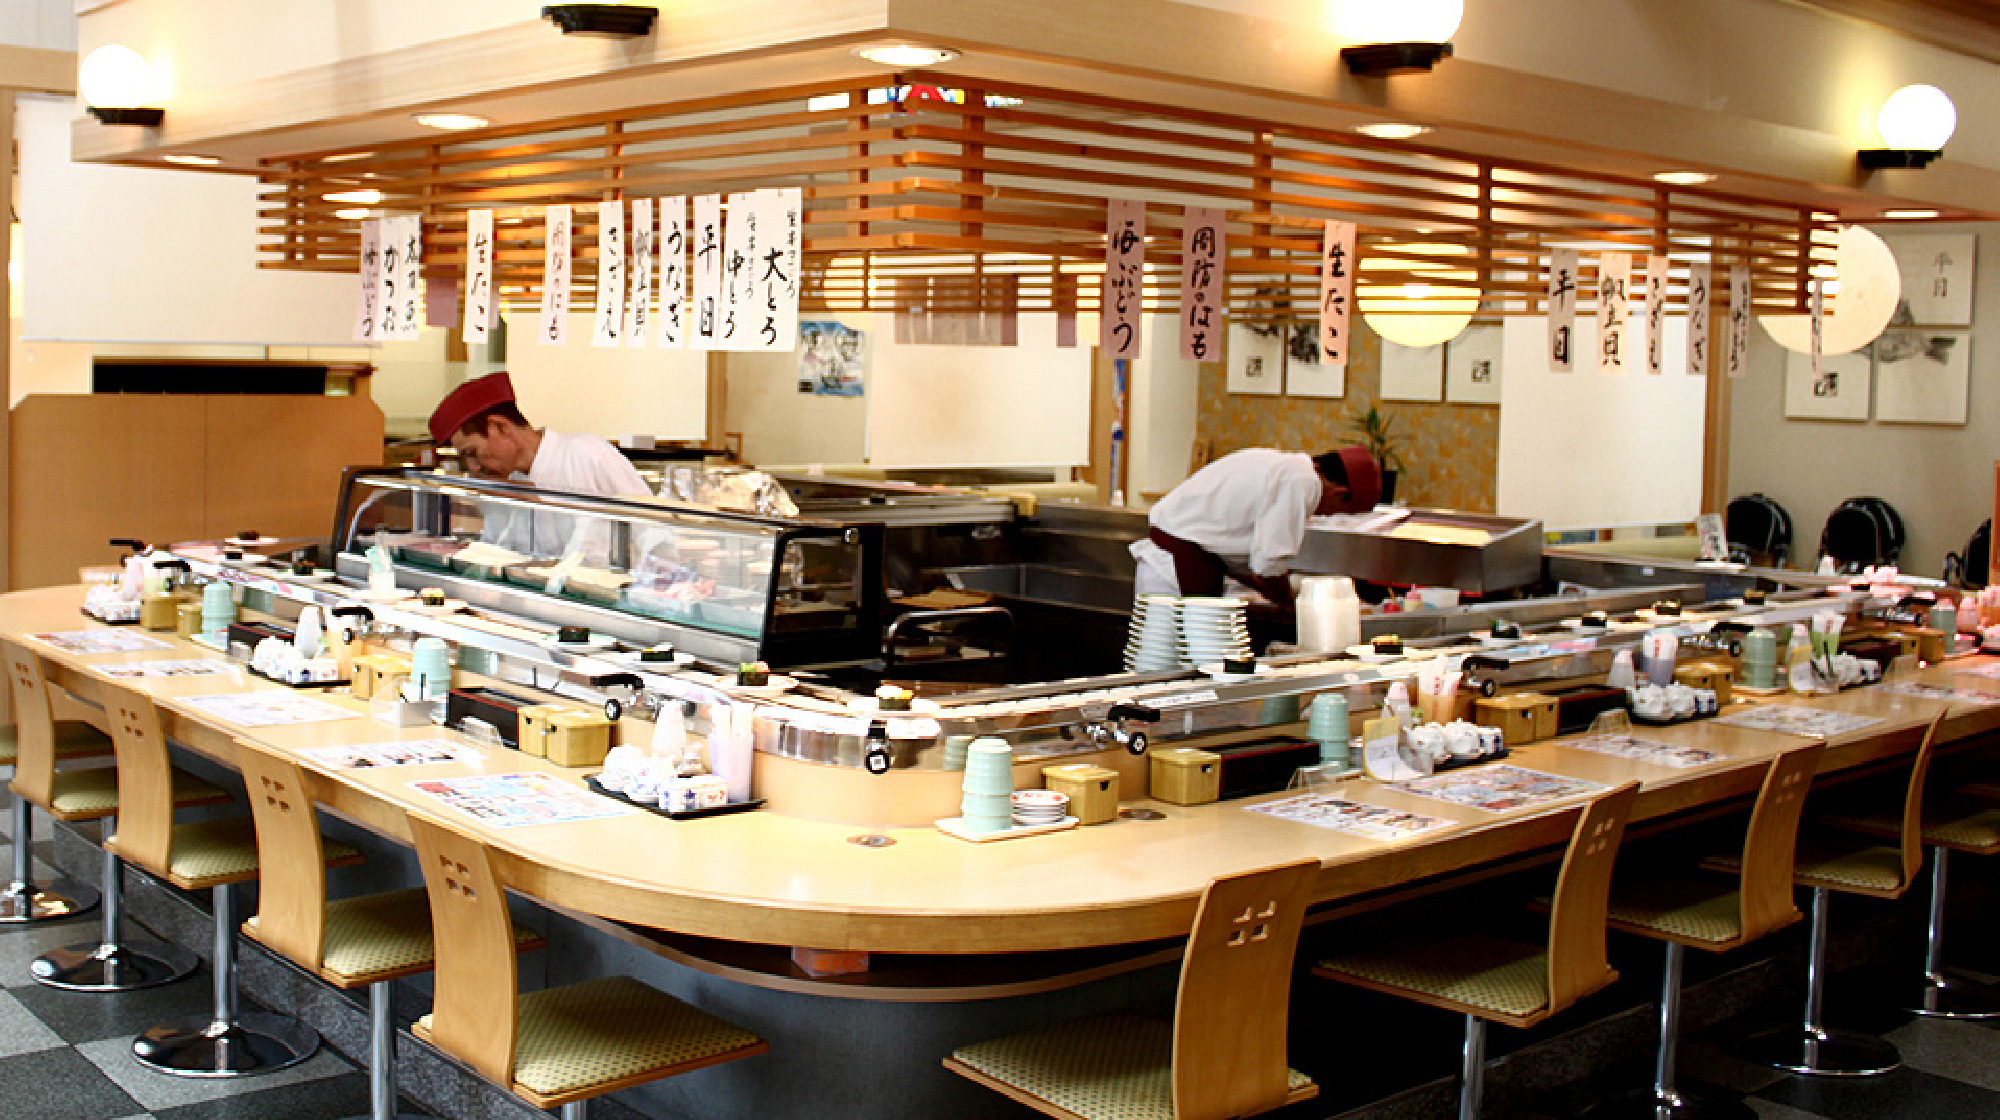 Why don’t you try conveyor-belt sushi?